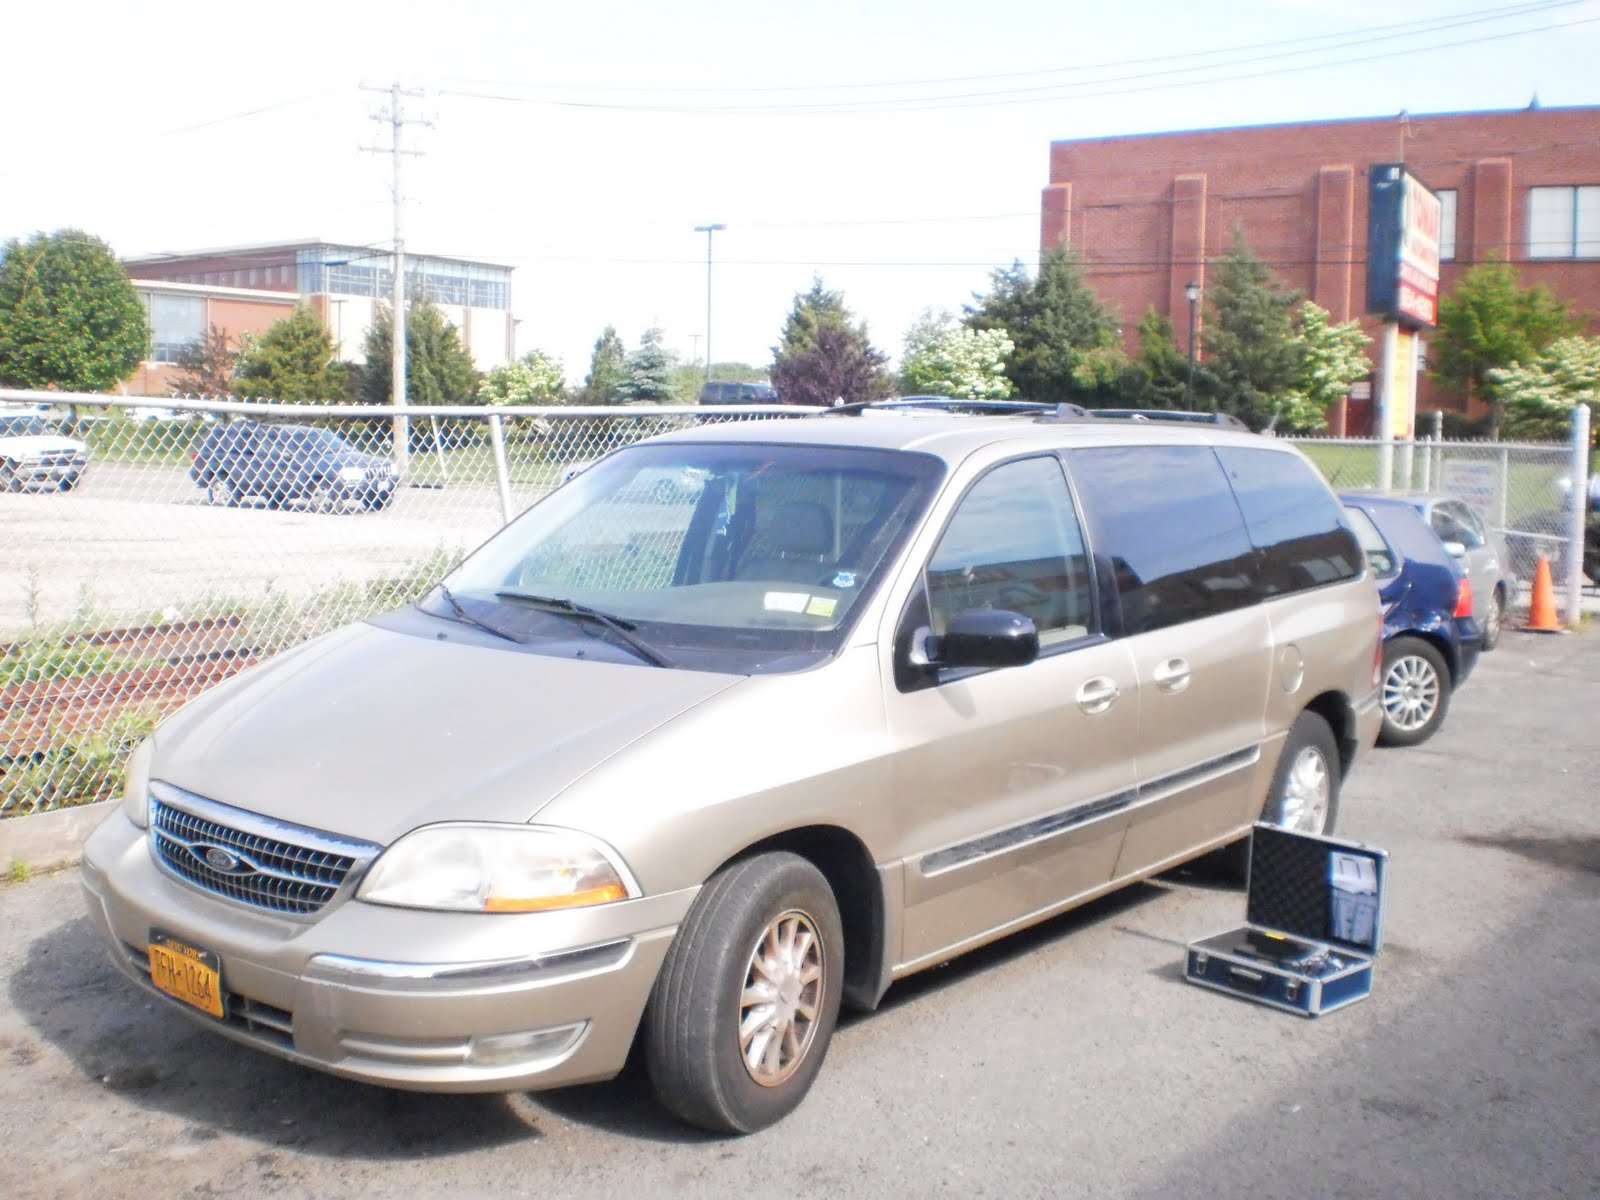 1999 Ford windstar owners manual pdf #8